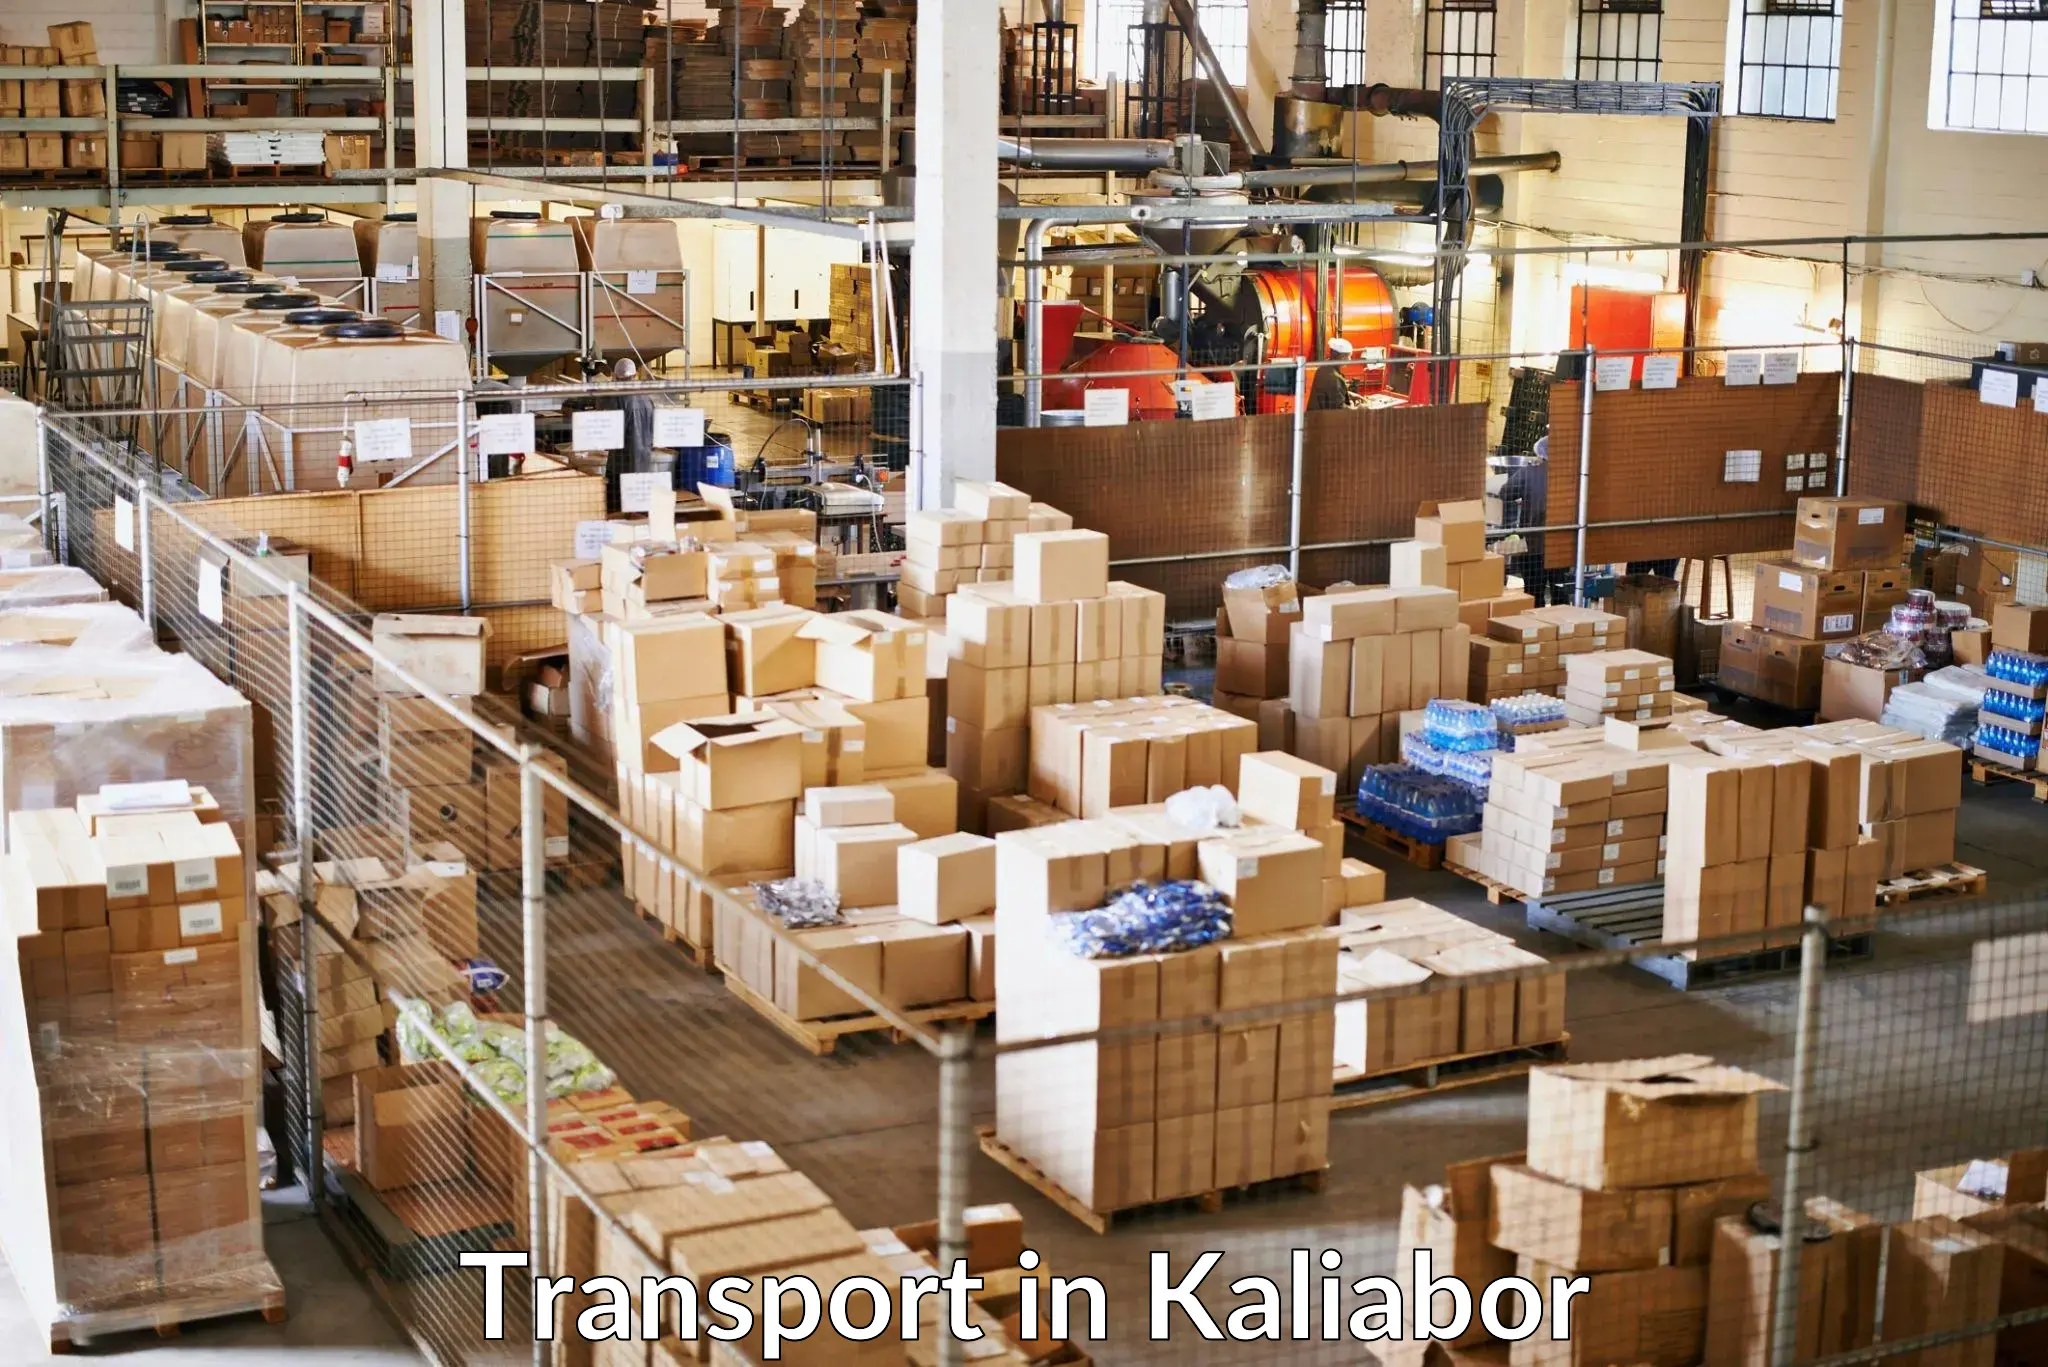 Commercial transport service in Kaliabor